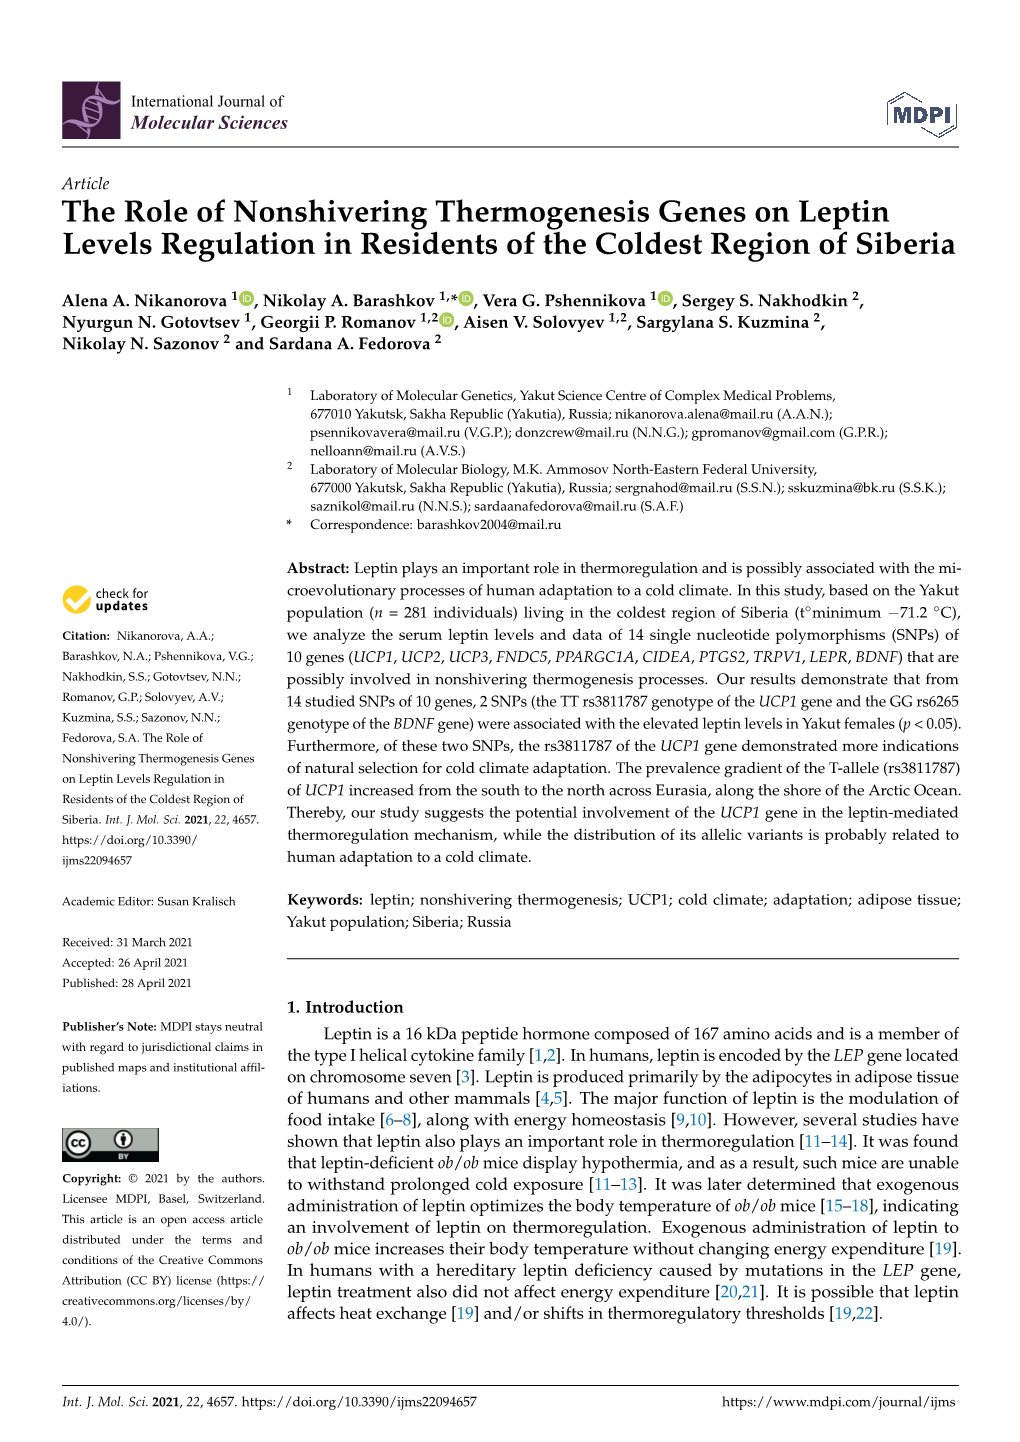 The Role of Nonshivering Thermogenesis Genes on Leptin Levels Regulation in Residents of the Coldest Region of Siberia